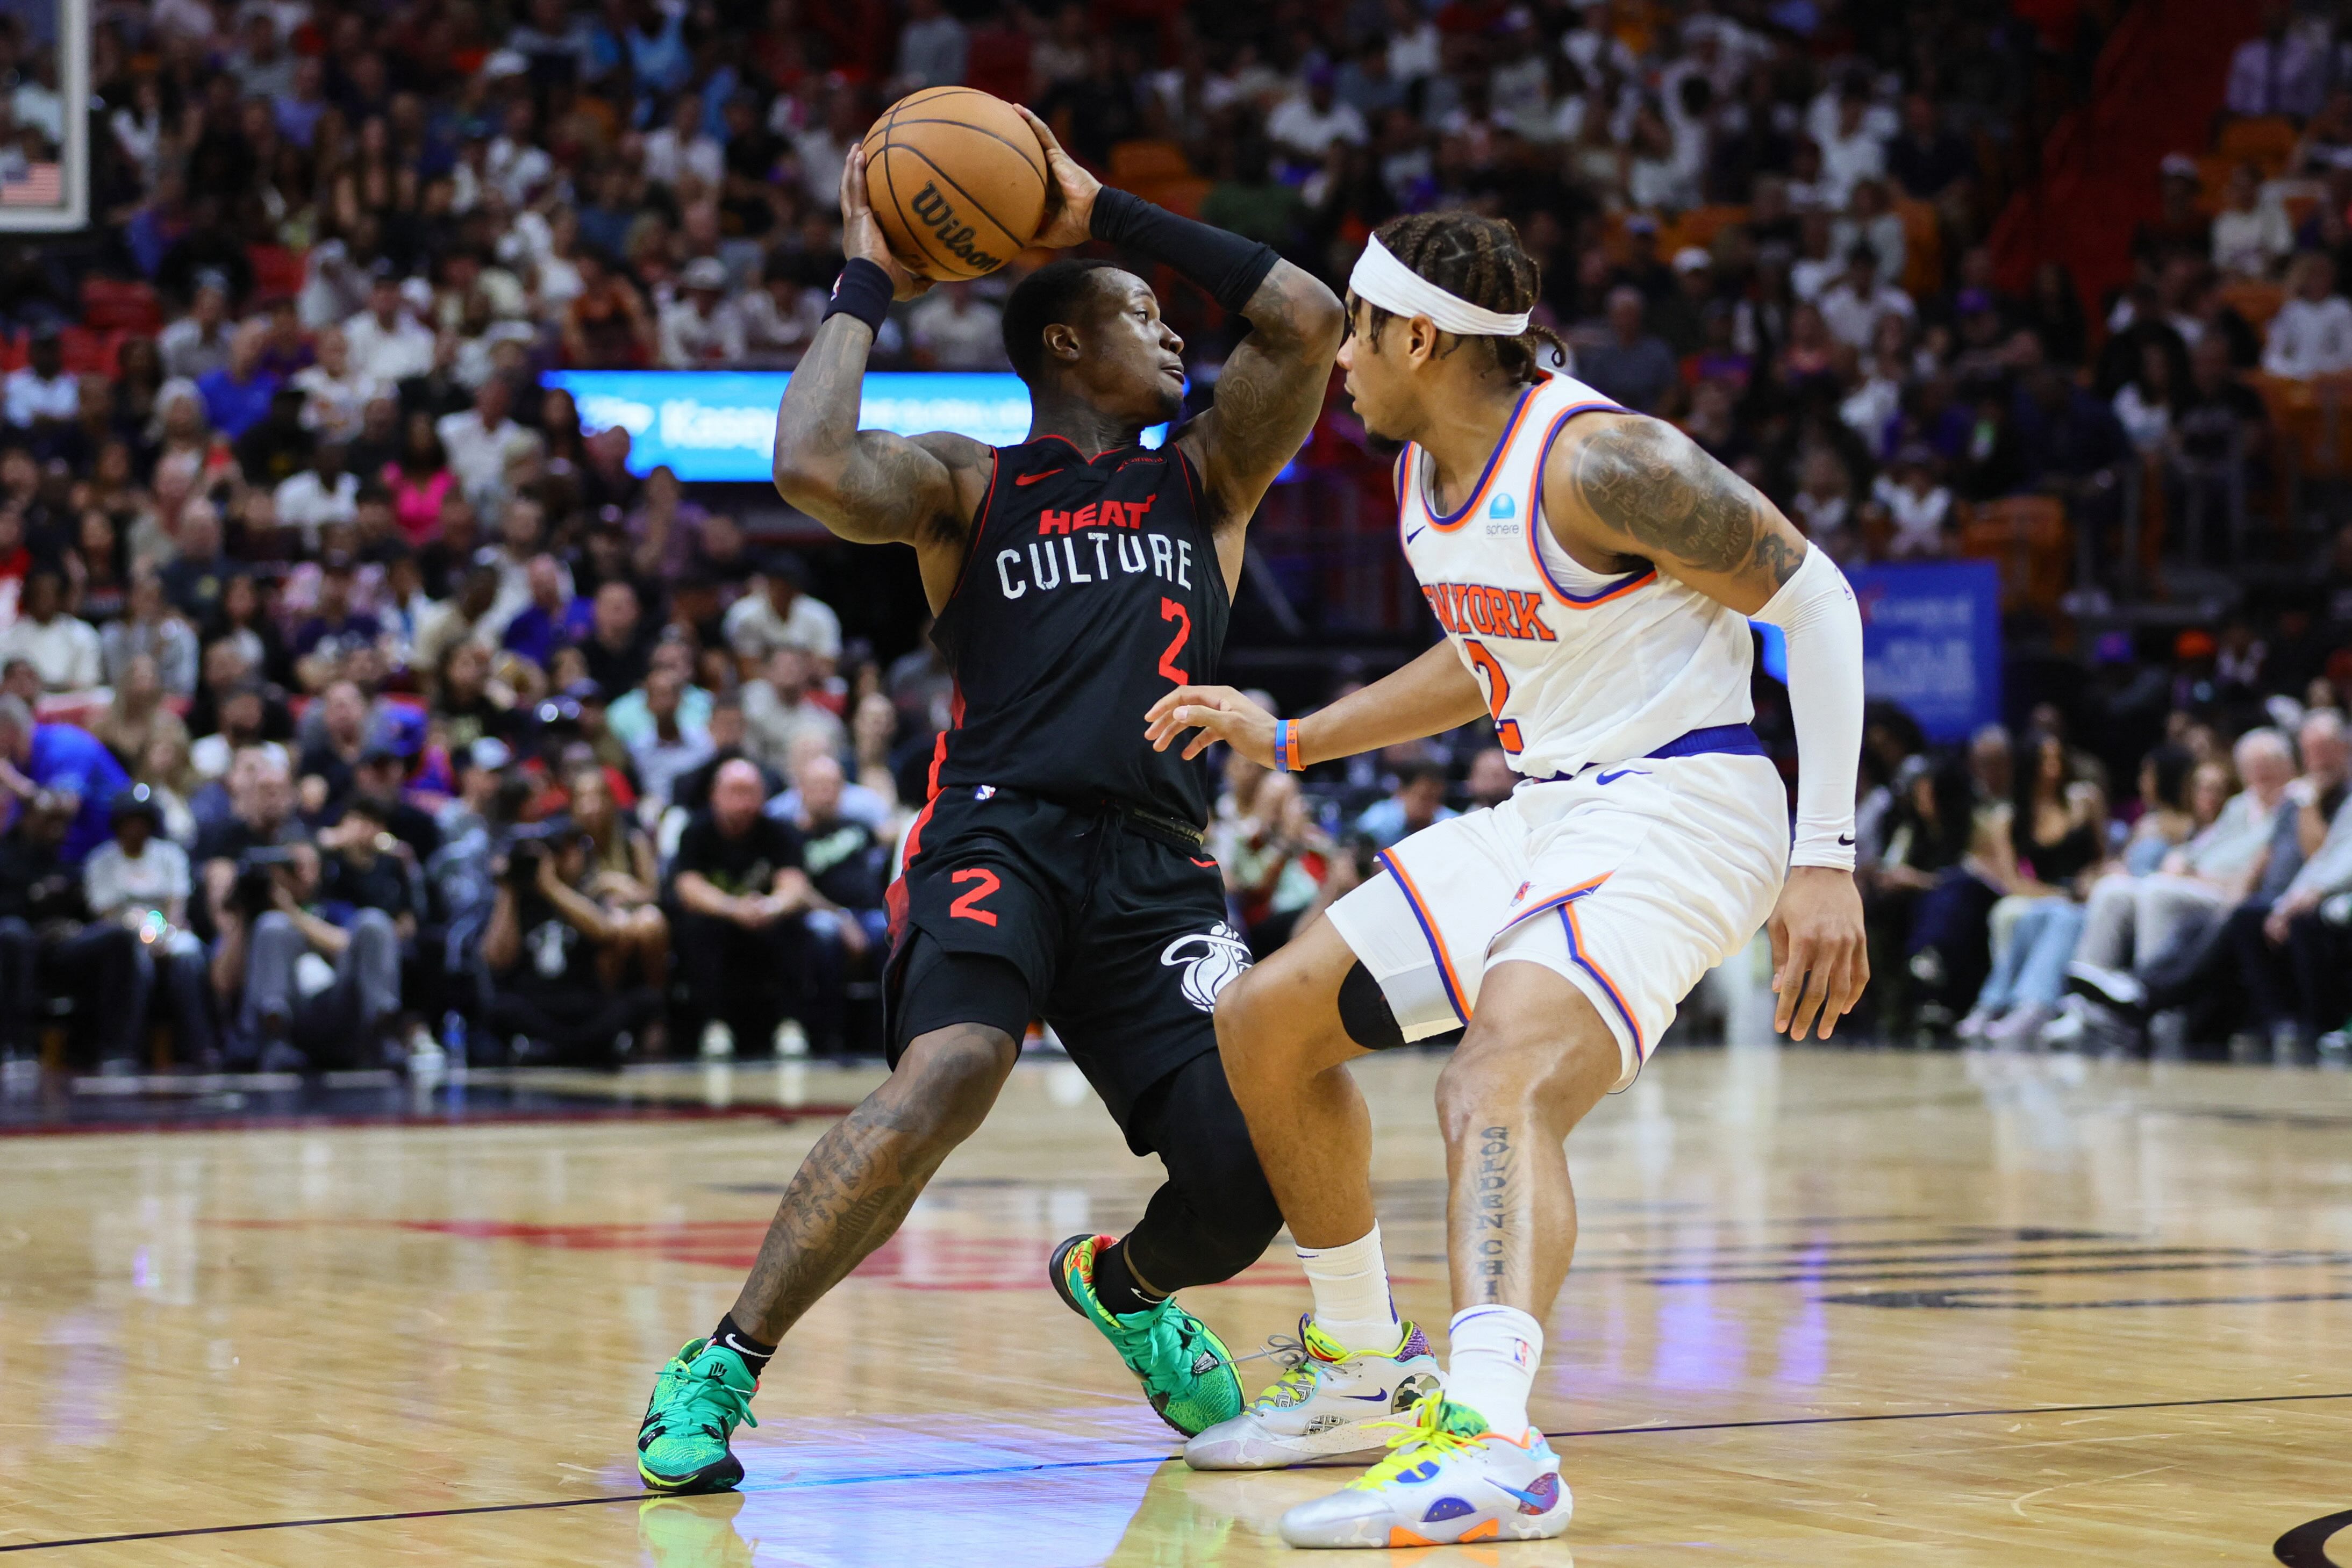 NBA: Terry Rozier scores 34, helps Heat hold off Knicks